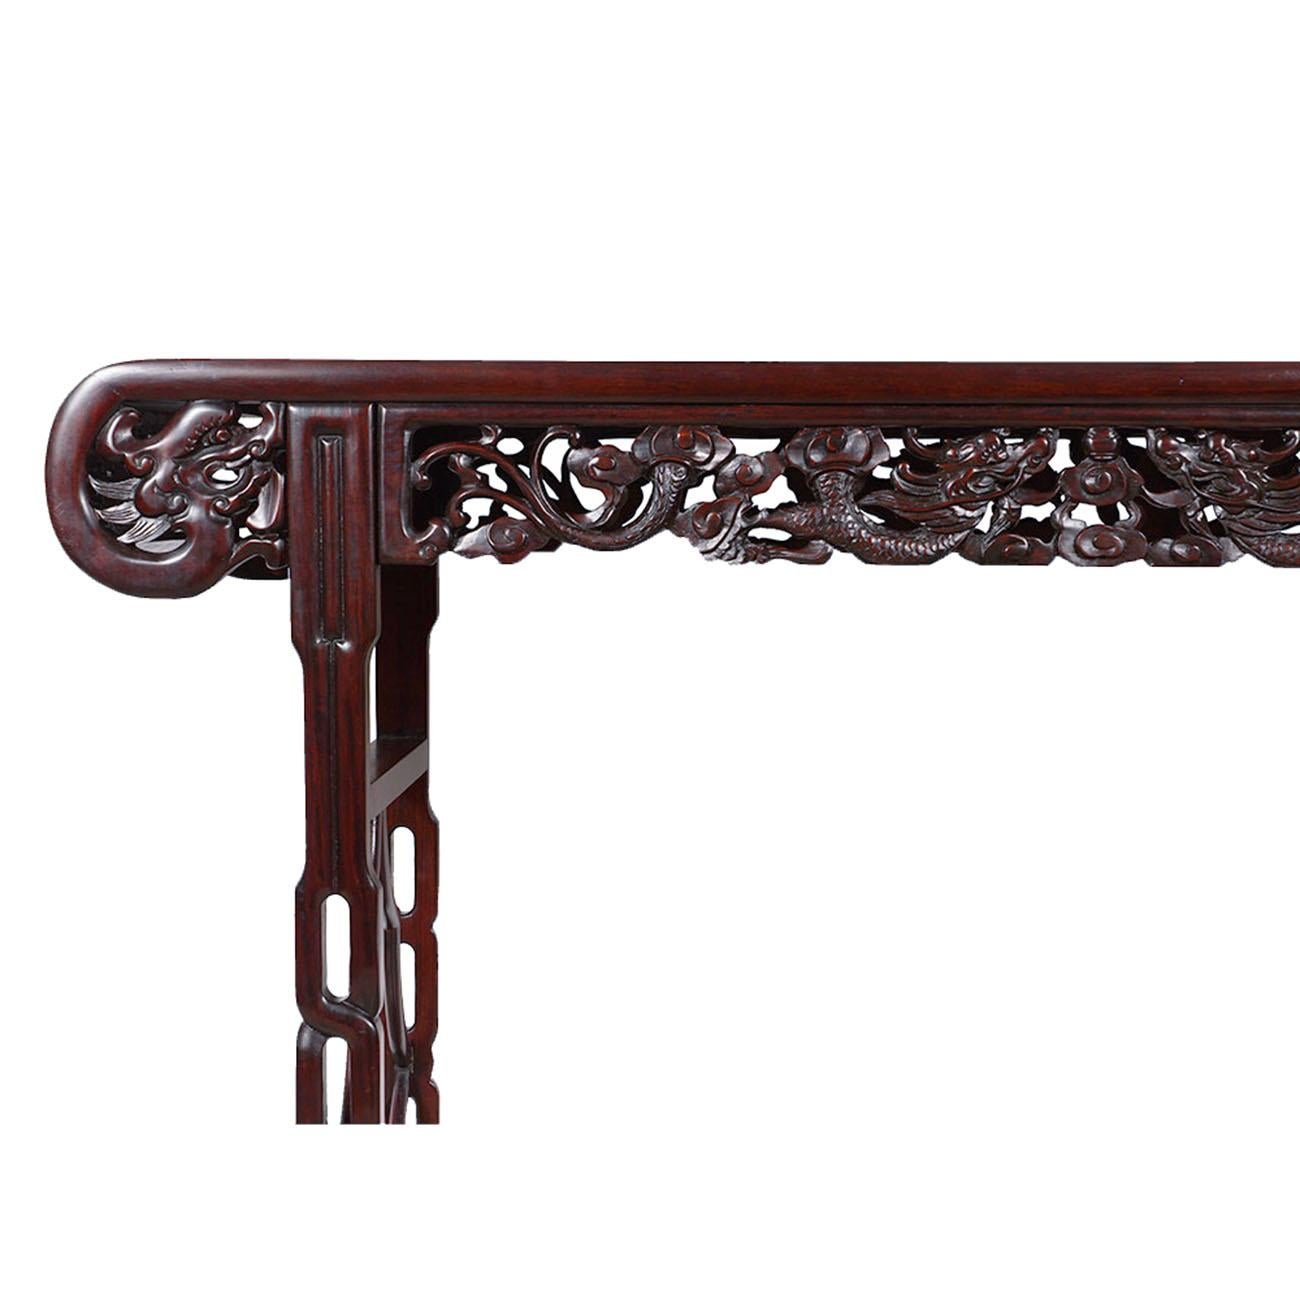 Chinese Export Antique Chinese Carved Rosewood Altar Table, Sofa Table, Entry Console